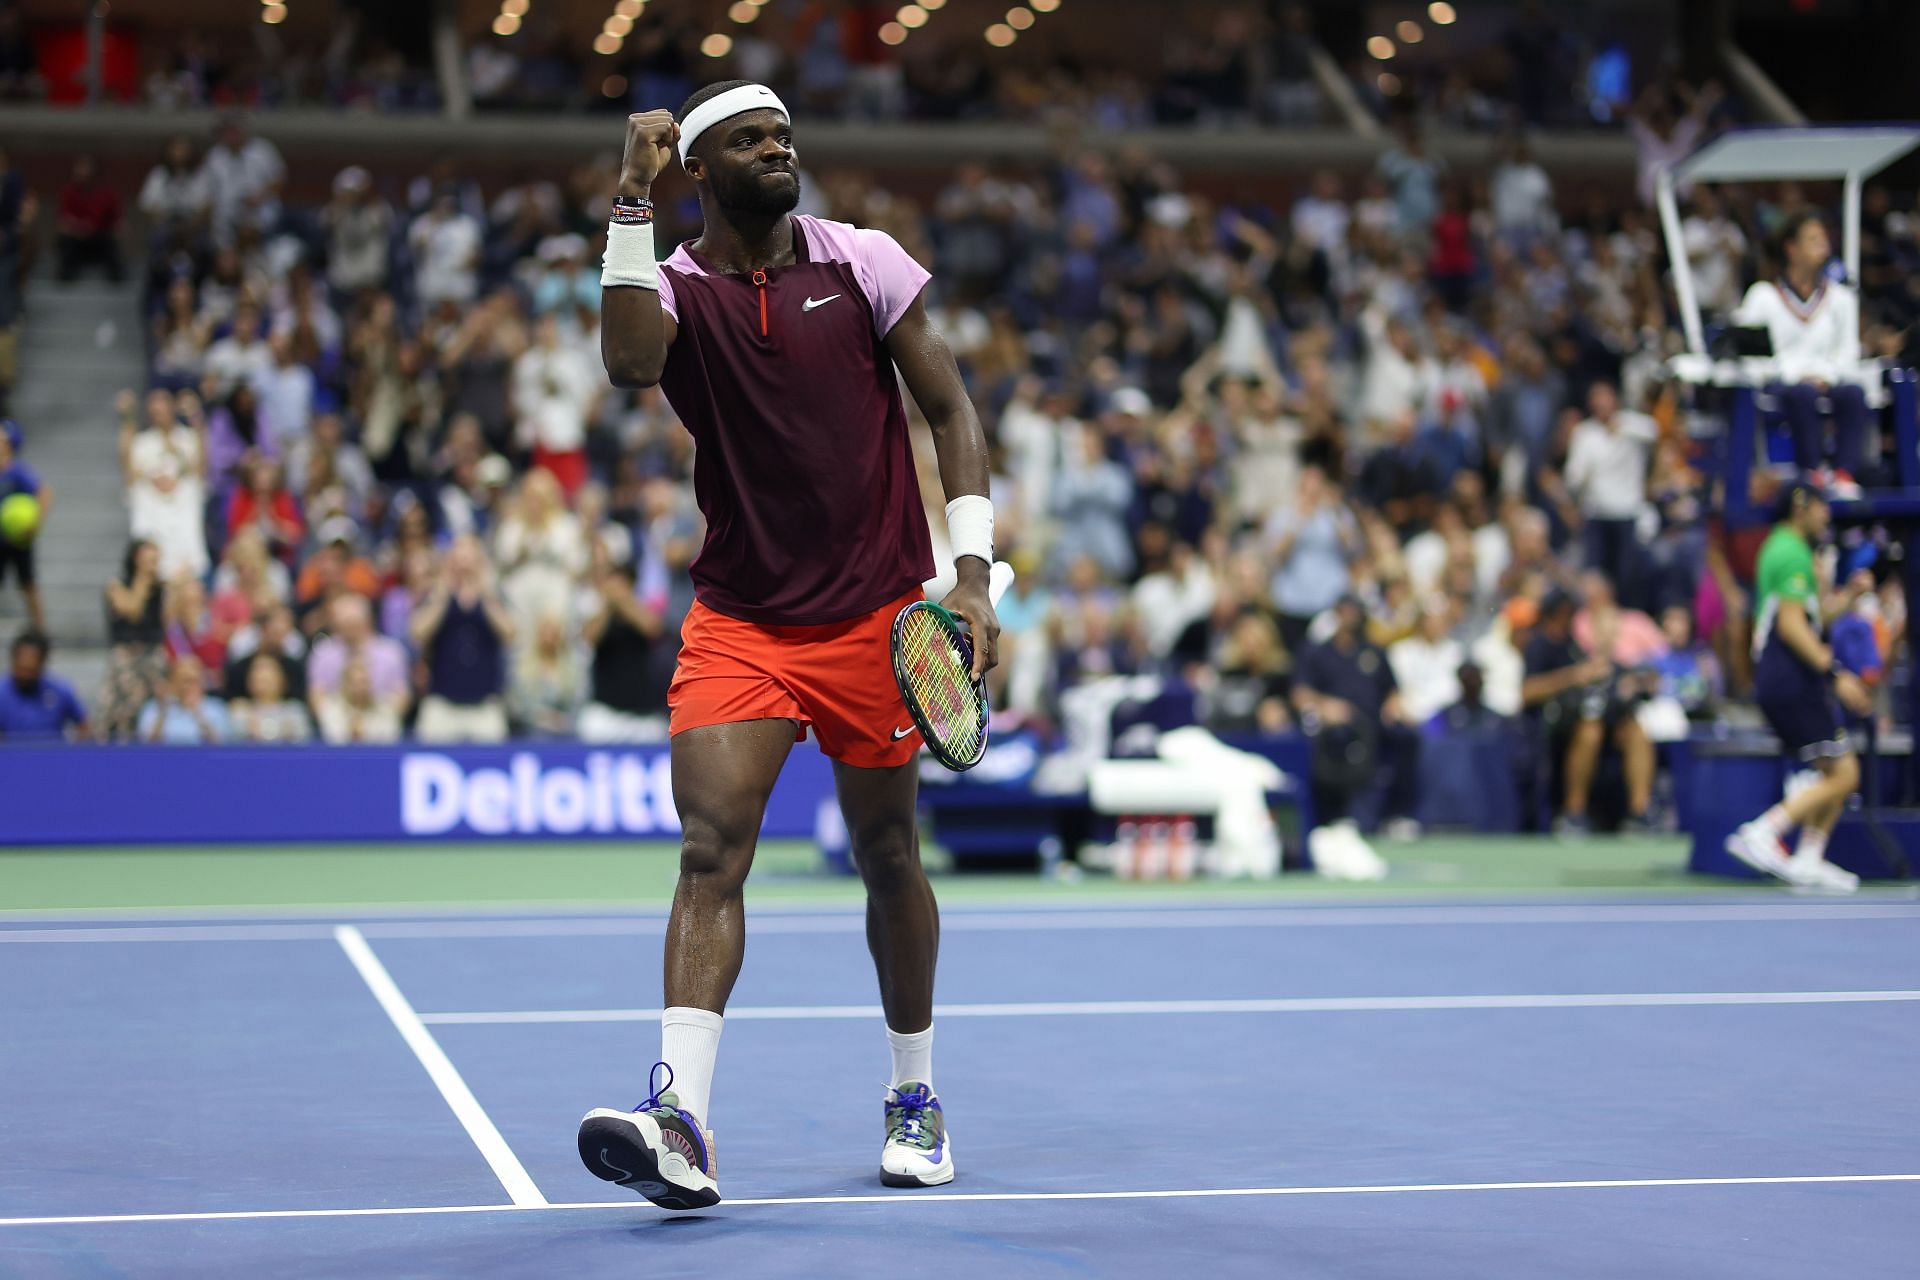 Frances Tiafoe celebrates winning a game against Carlos Alcaraz at the 2022 US Open